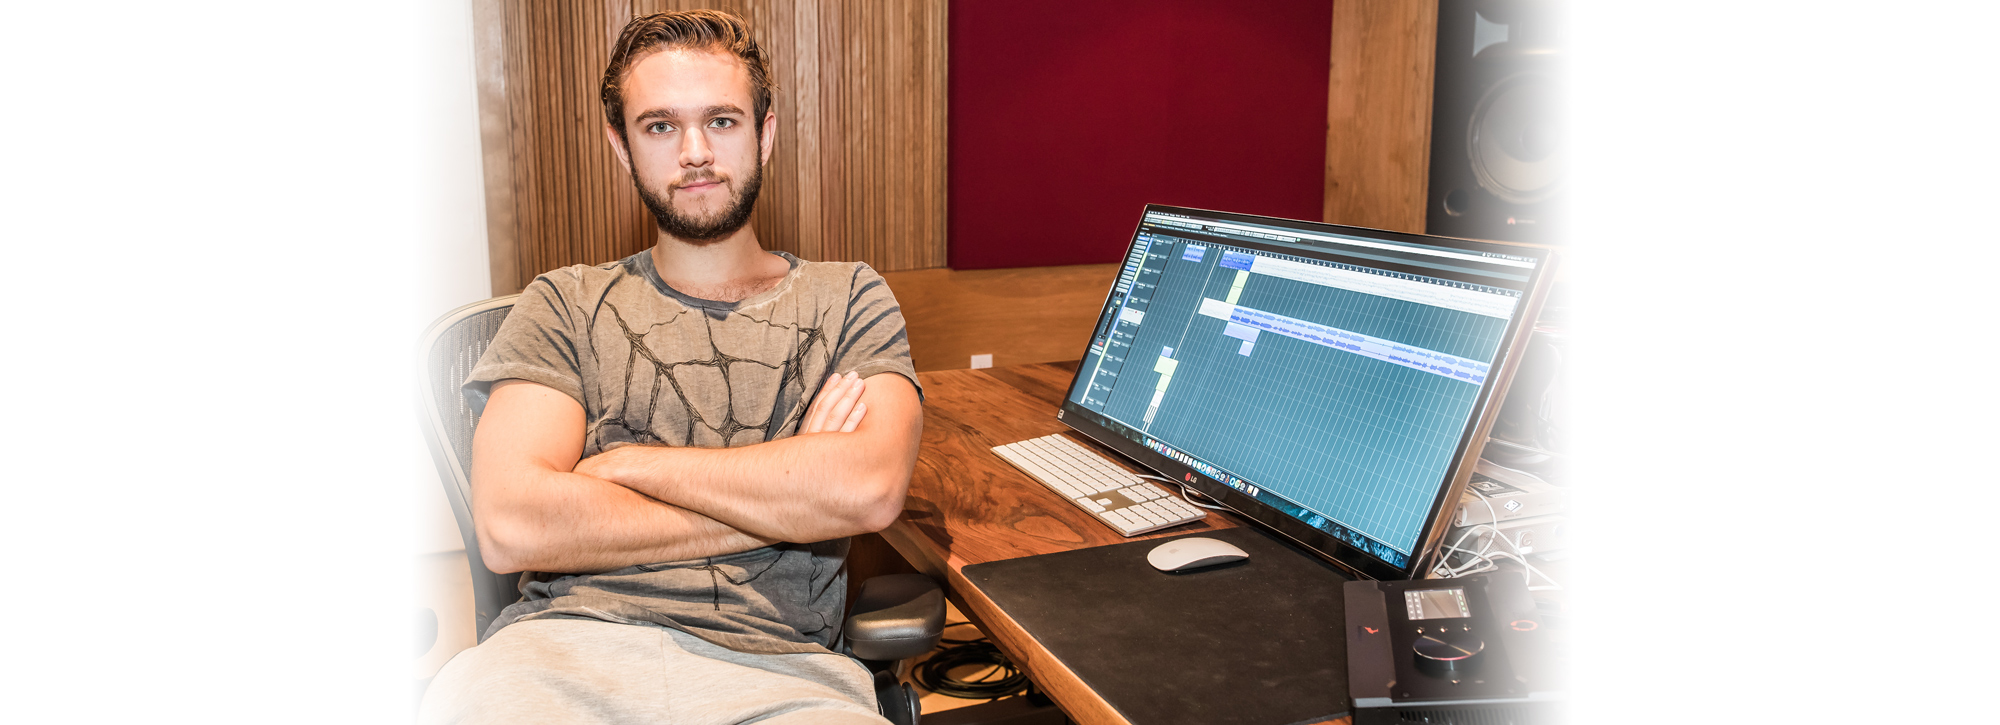 Award-Winning Producer, DJ, and Musician Zedd Keeps the Hits Coming with Antelope Audio